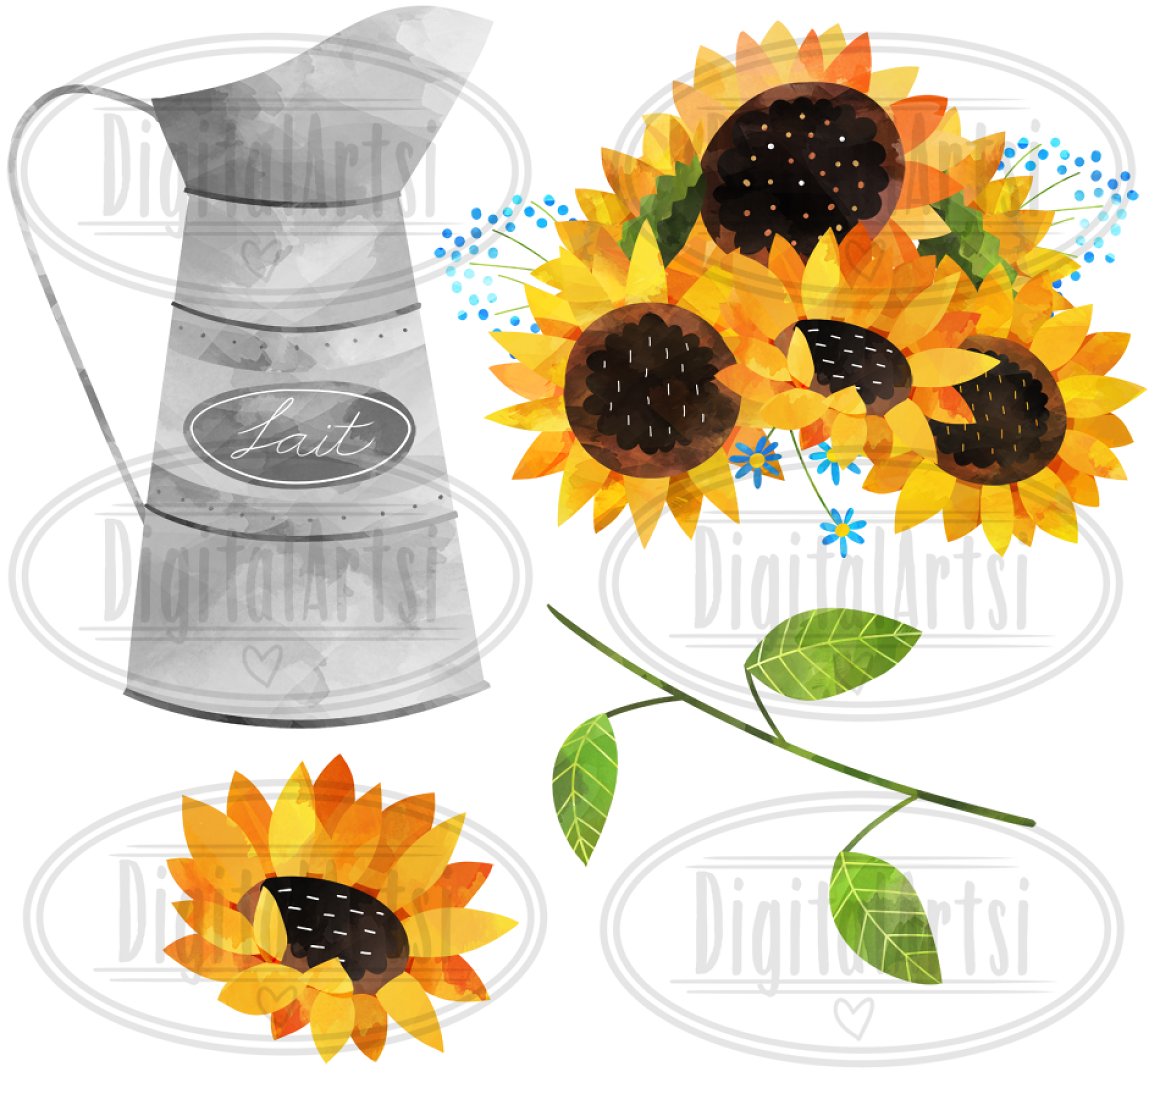 Watercolor Sunflower Clipart.